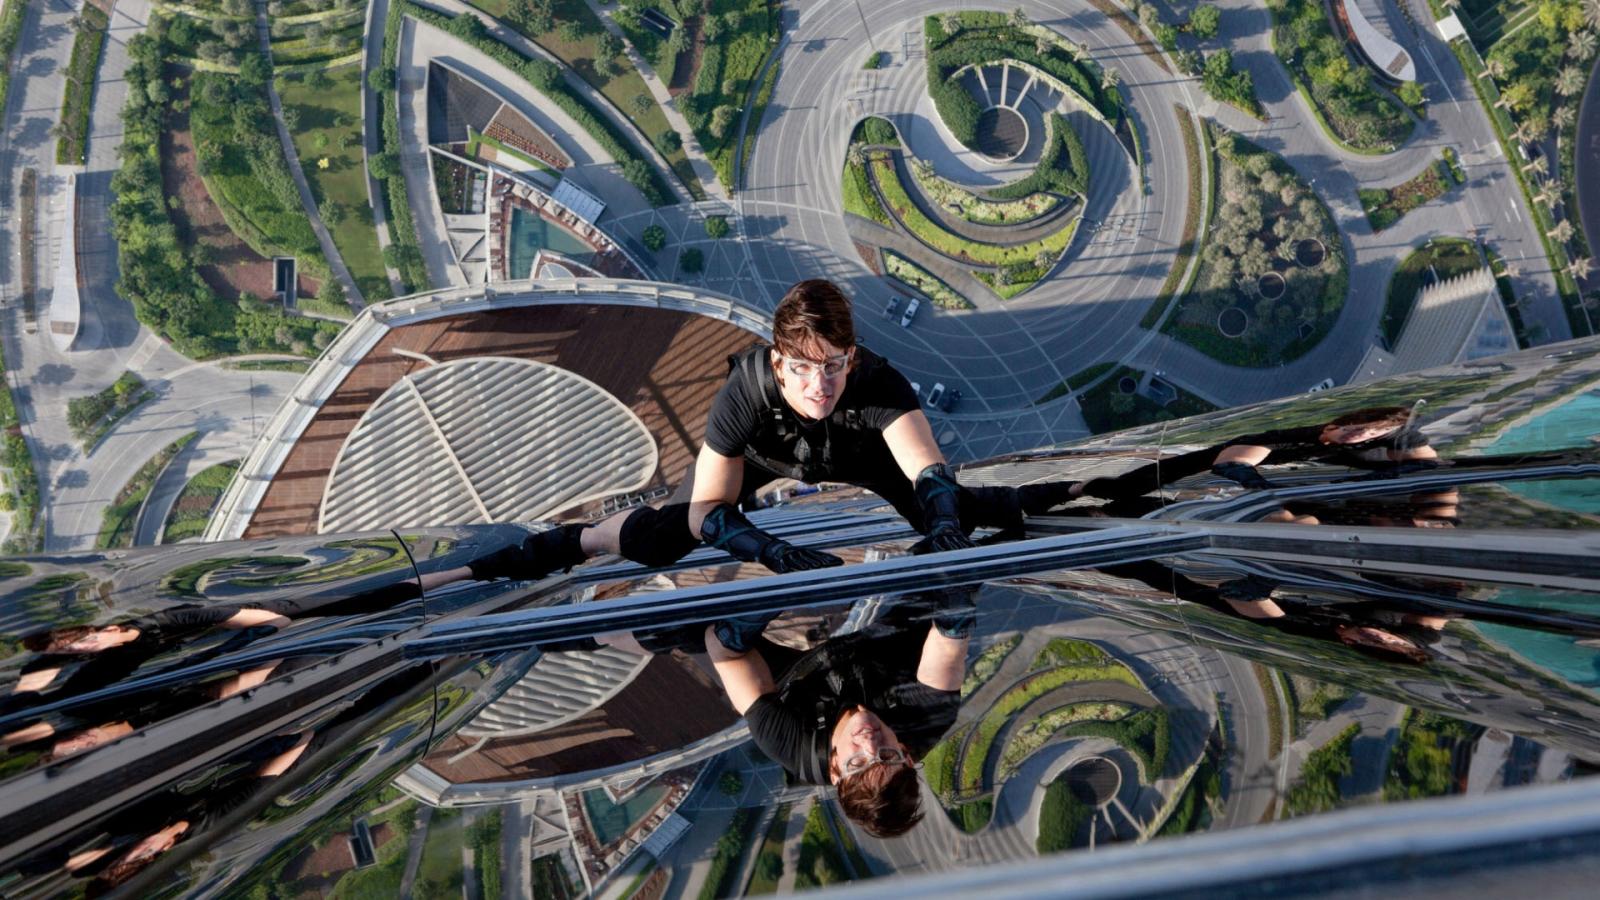 12 Action Movies That Forgot Physics Exists (We're Looking At You, Fast & Furious) - image 9